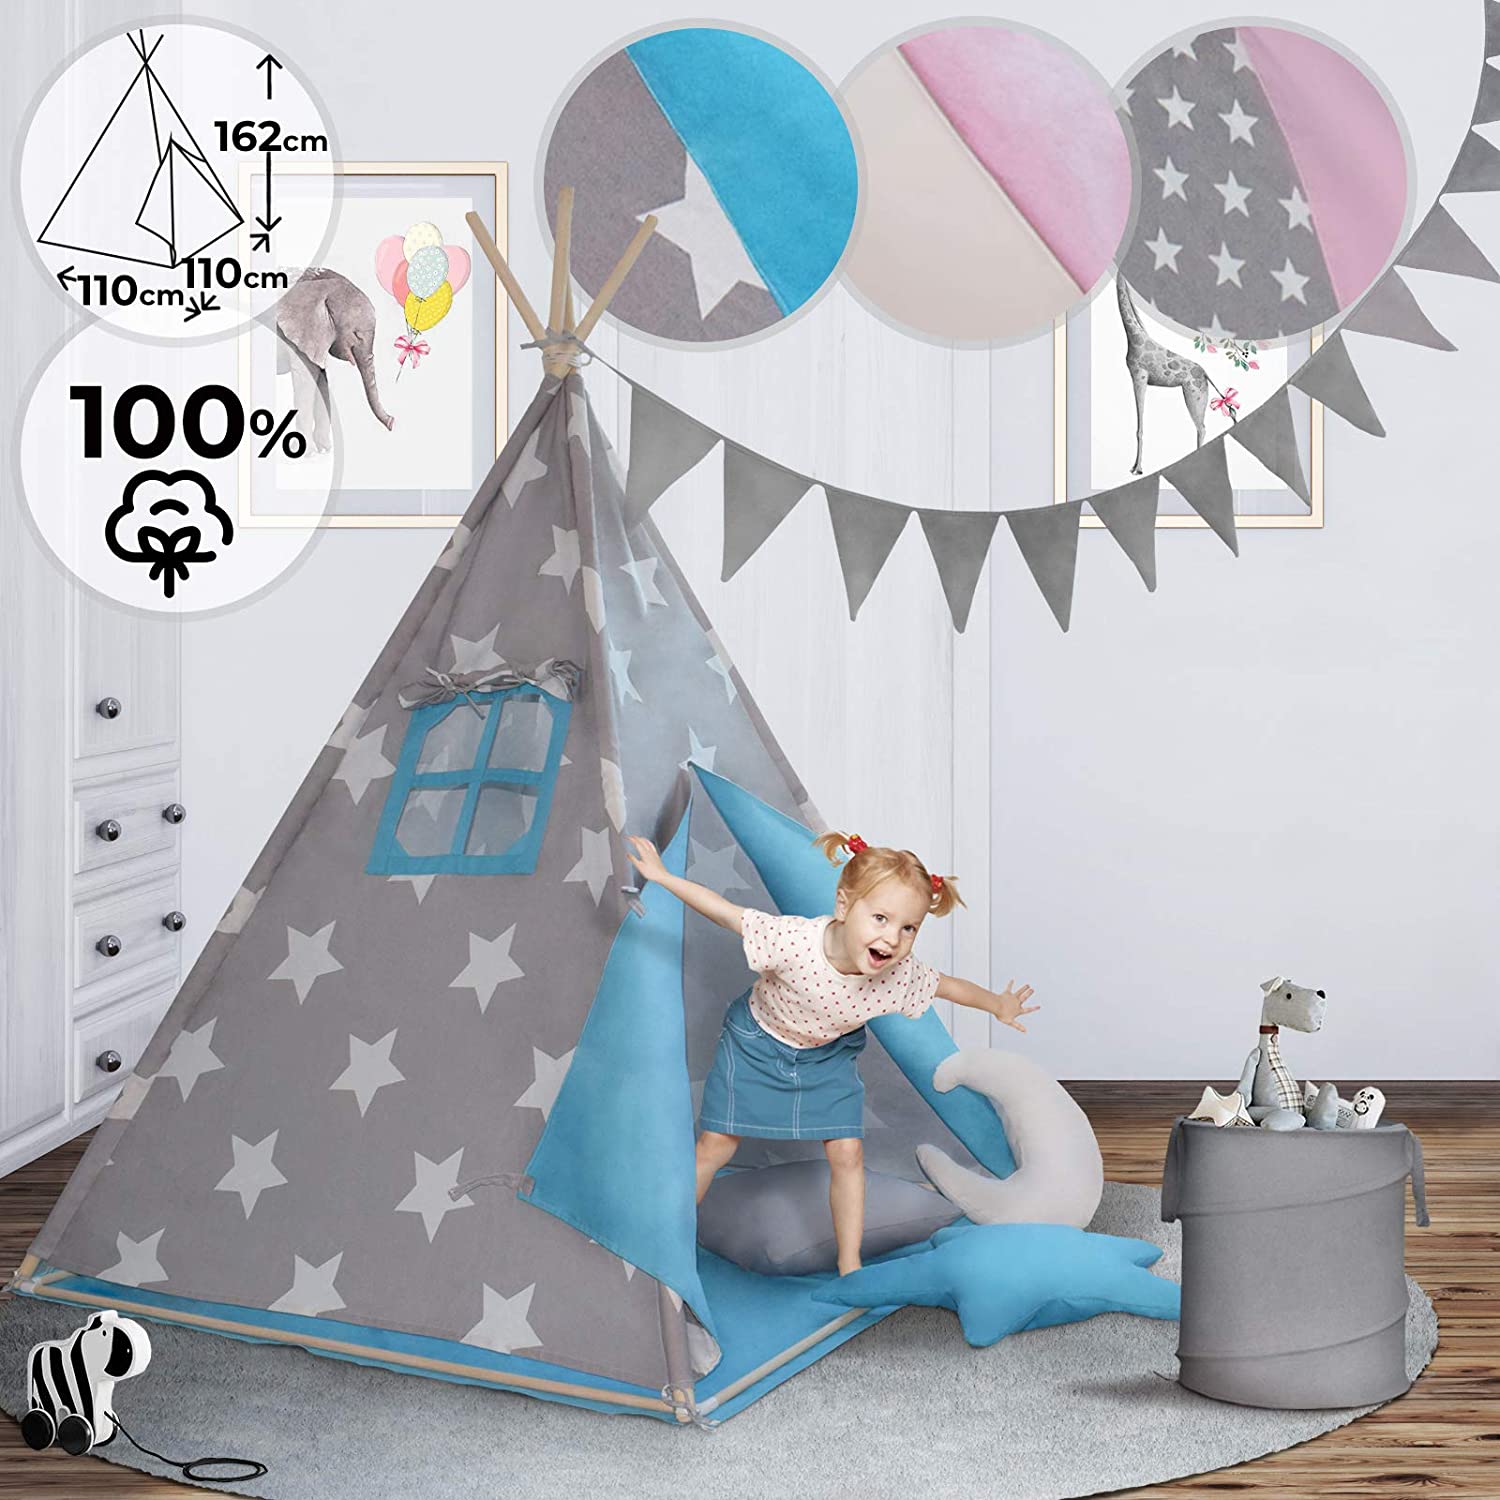 Teepee Play Tent for Children – with or Without Accessories, 100% Cotton, D